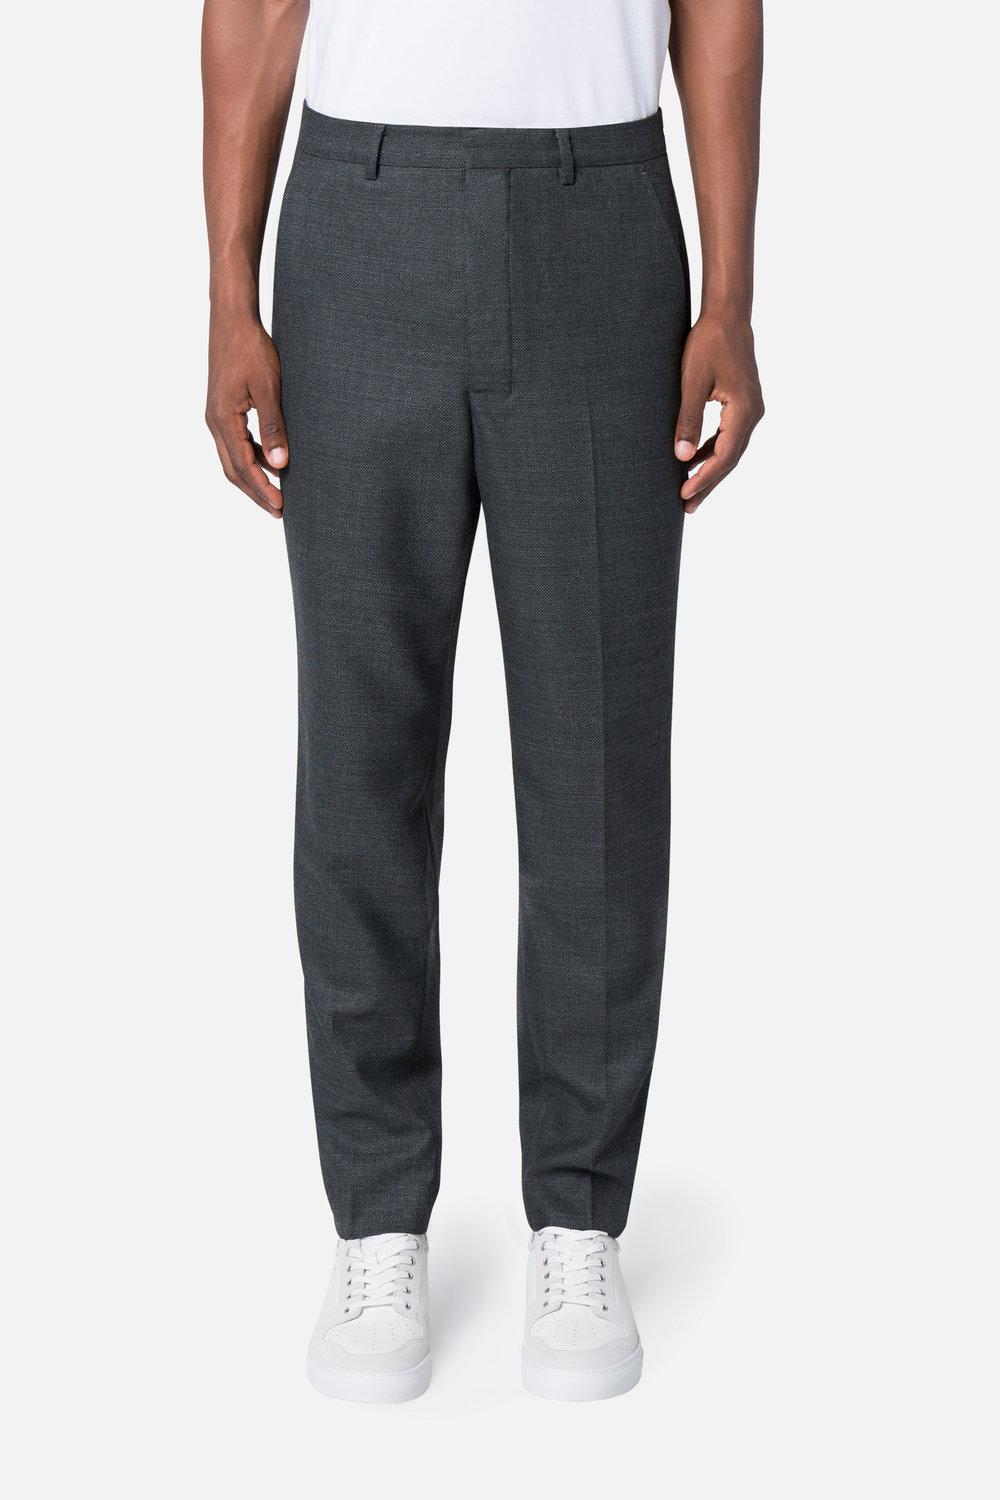 Lyst - Ami Carrot Fit Trousers for Men